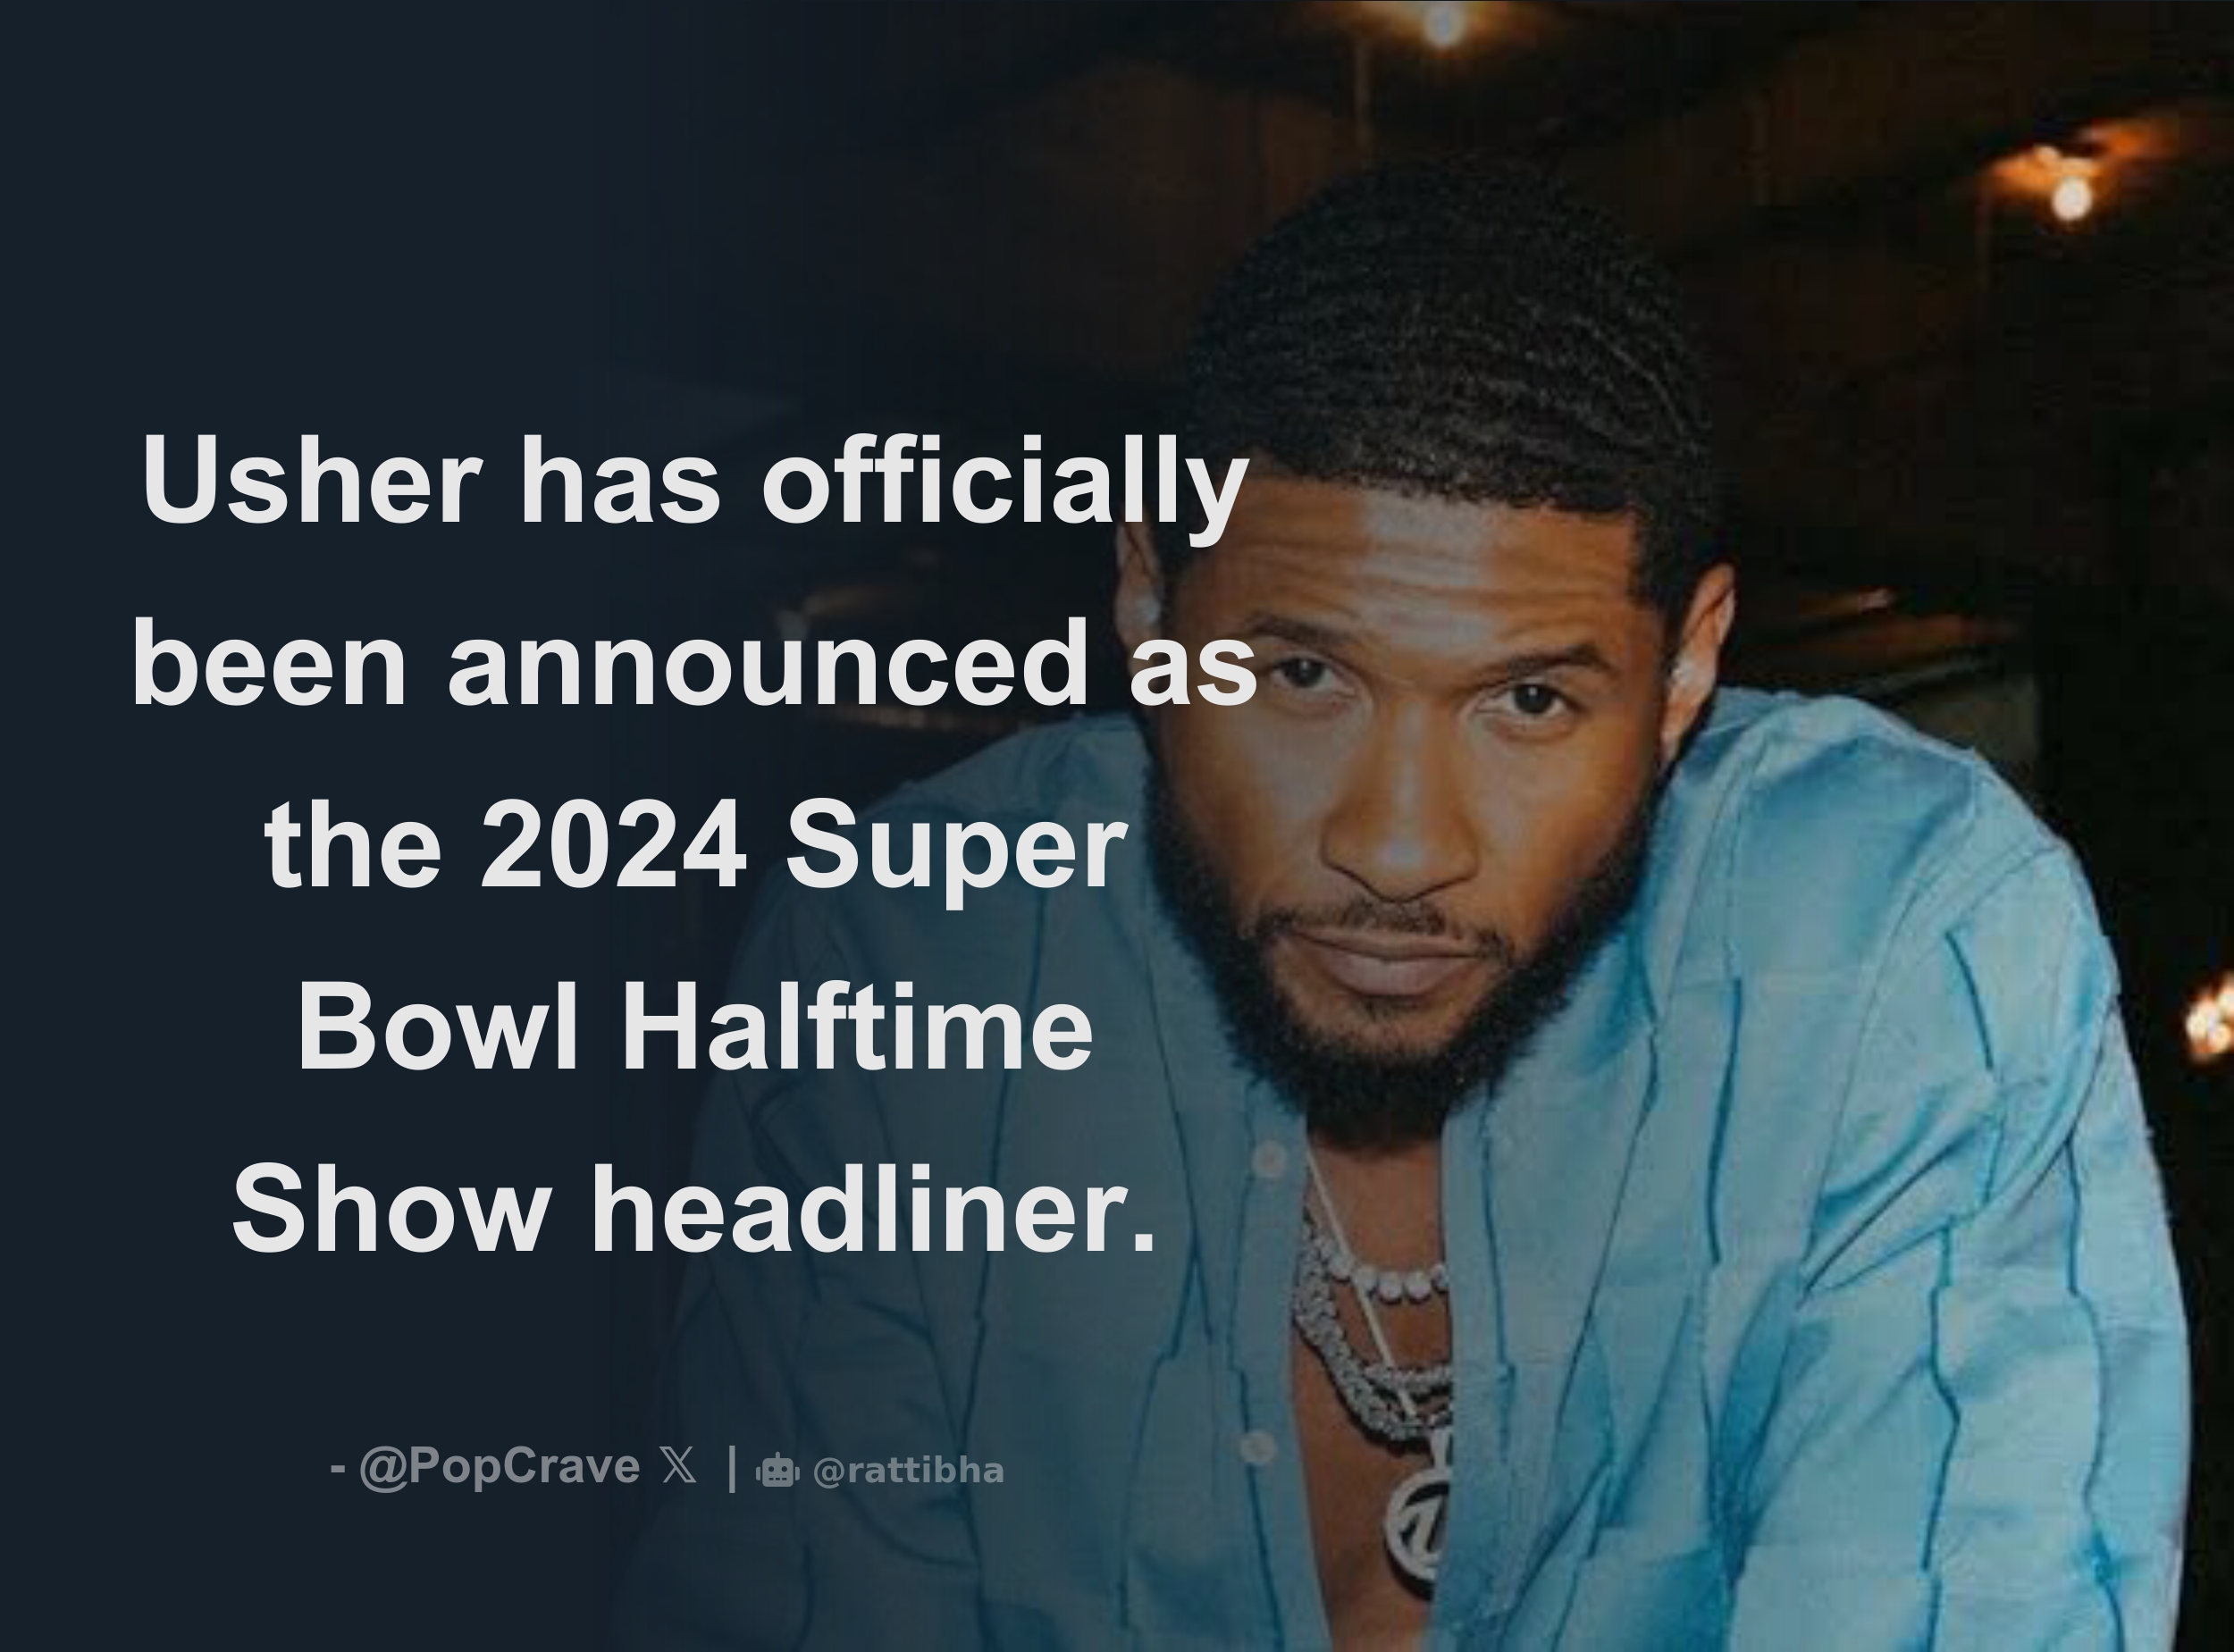 Usher has officially been announced as the 2024 Super Bowl Halftime Show  headliner. - Thread from Pop Crave @PopCrave - Rattibha